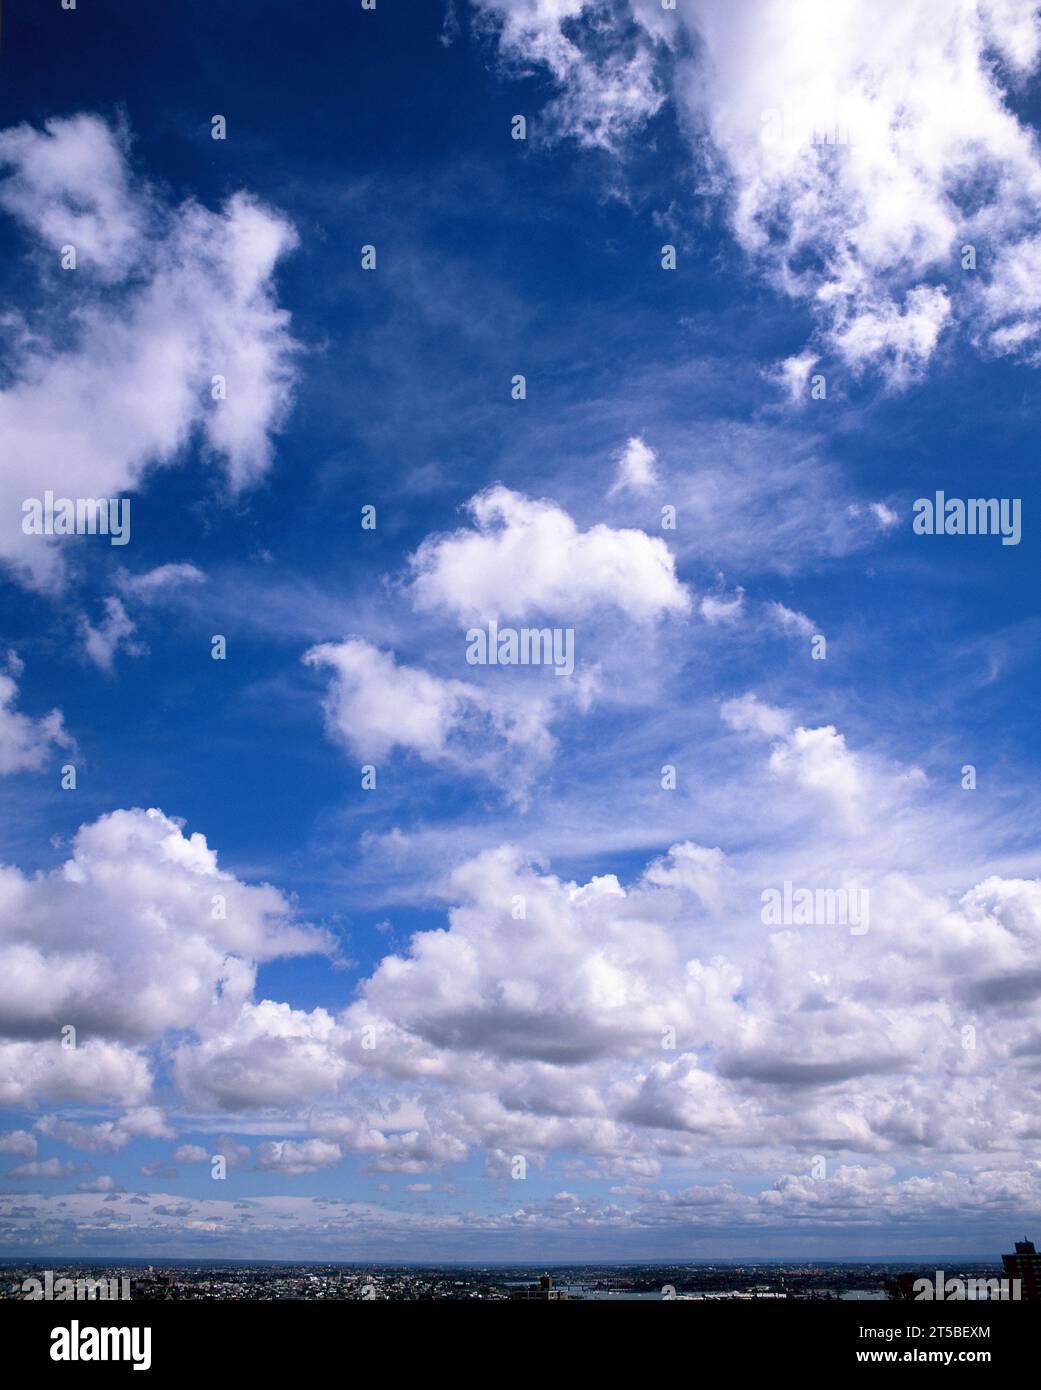 Blue sky with cumulus clouds over western suburbs of Sydney, Australia. Stock Photo